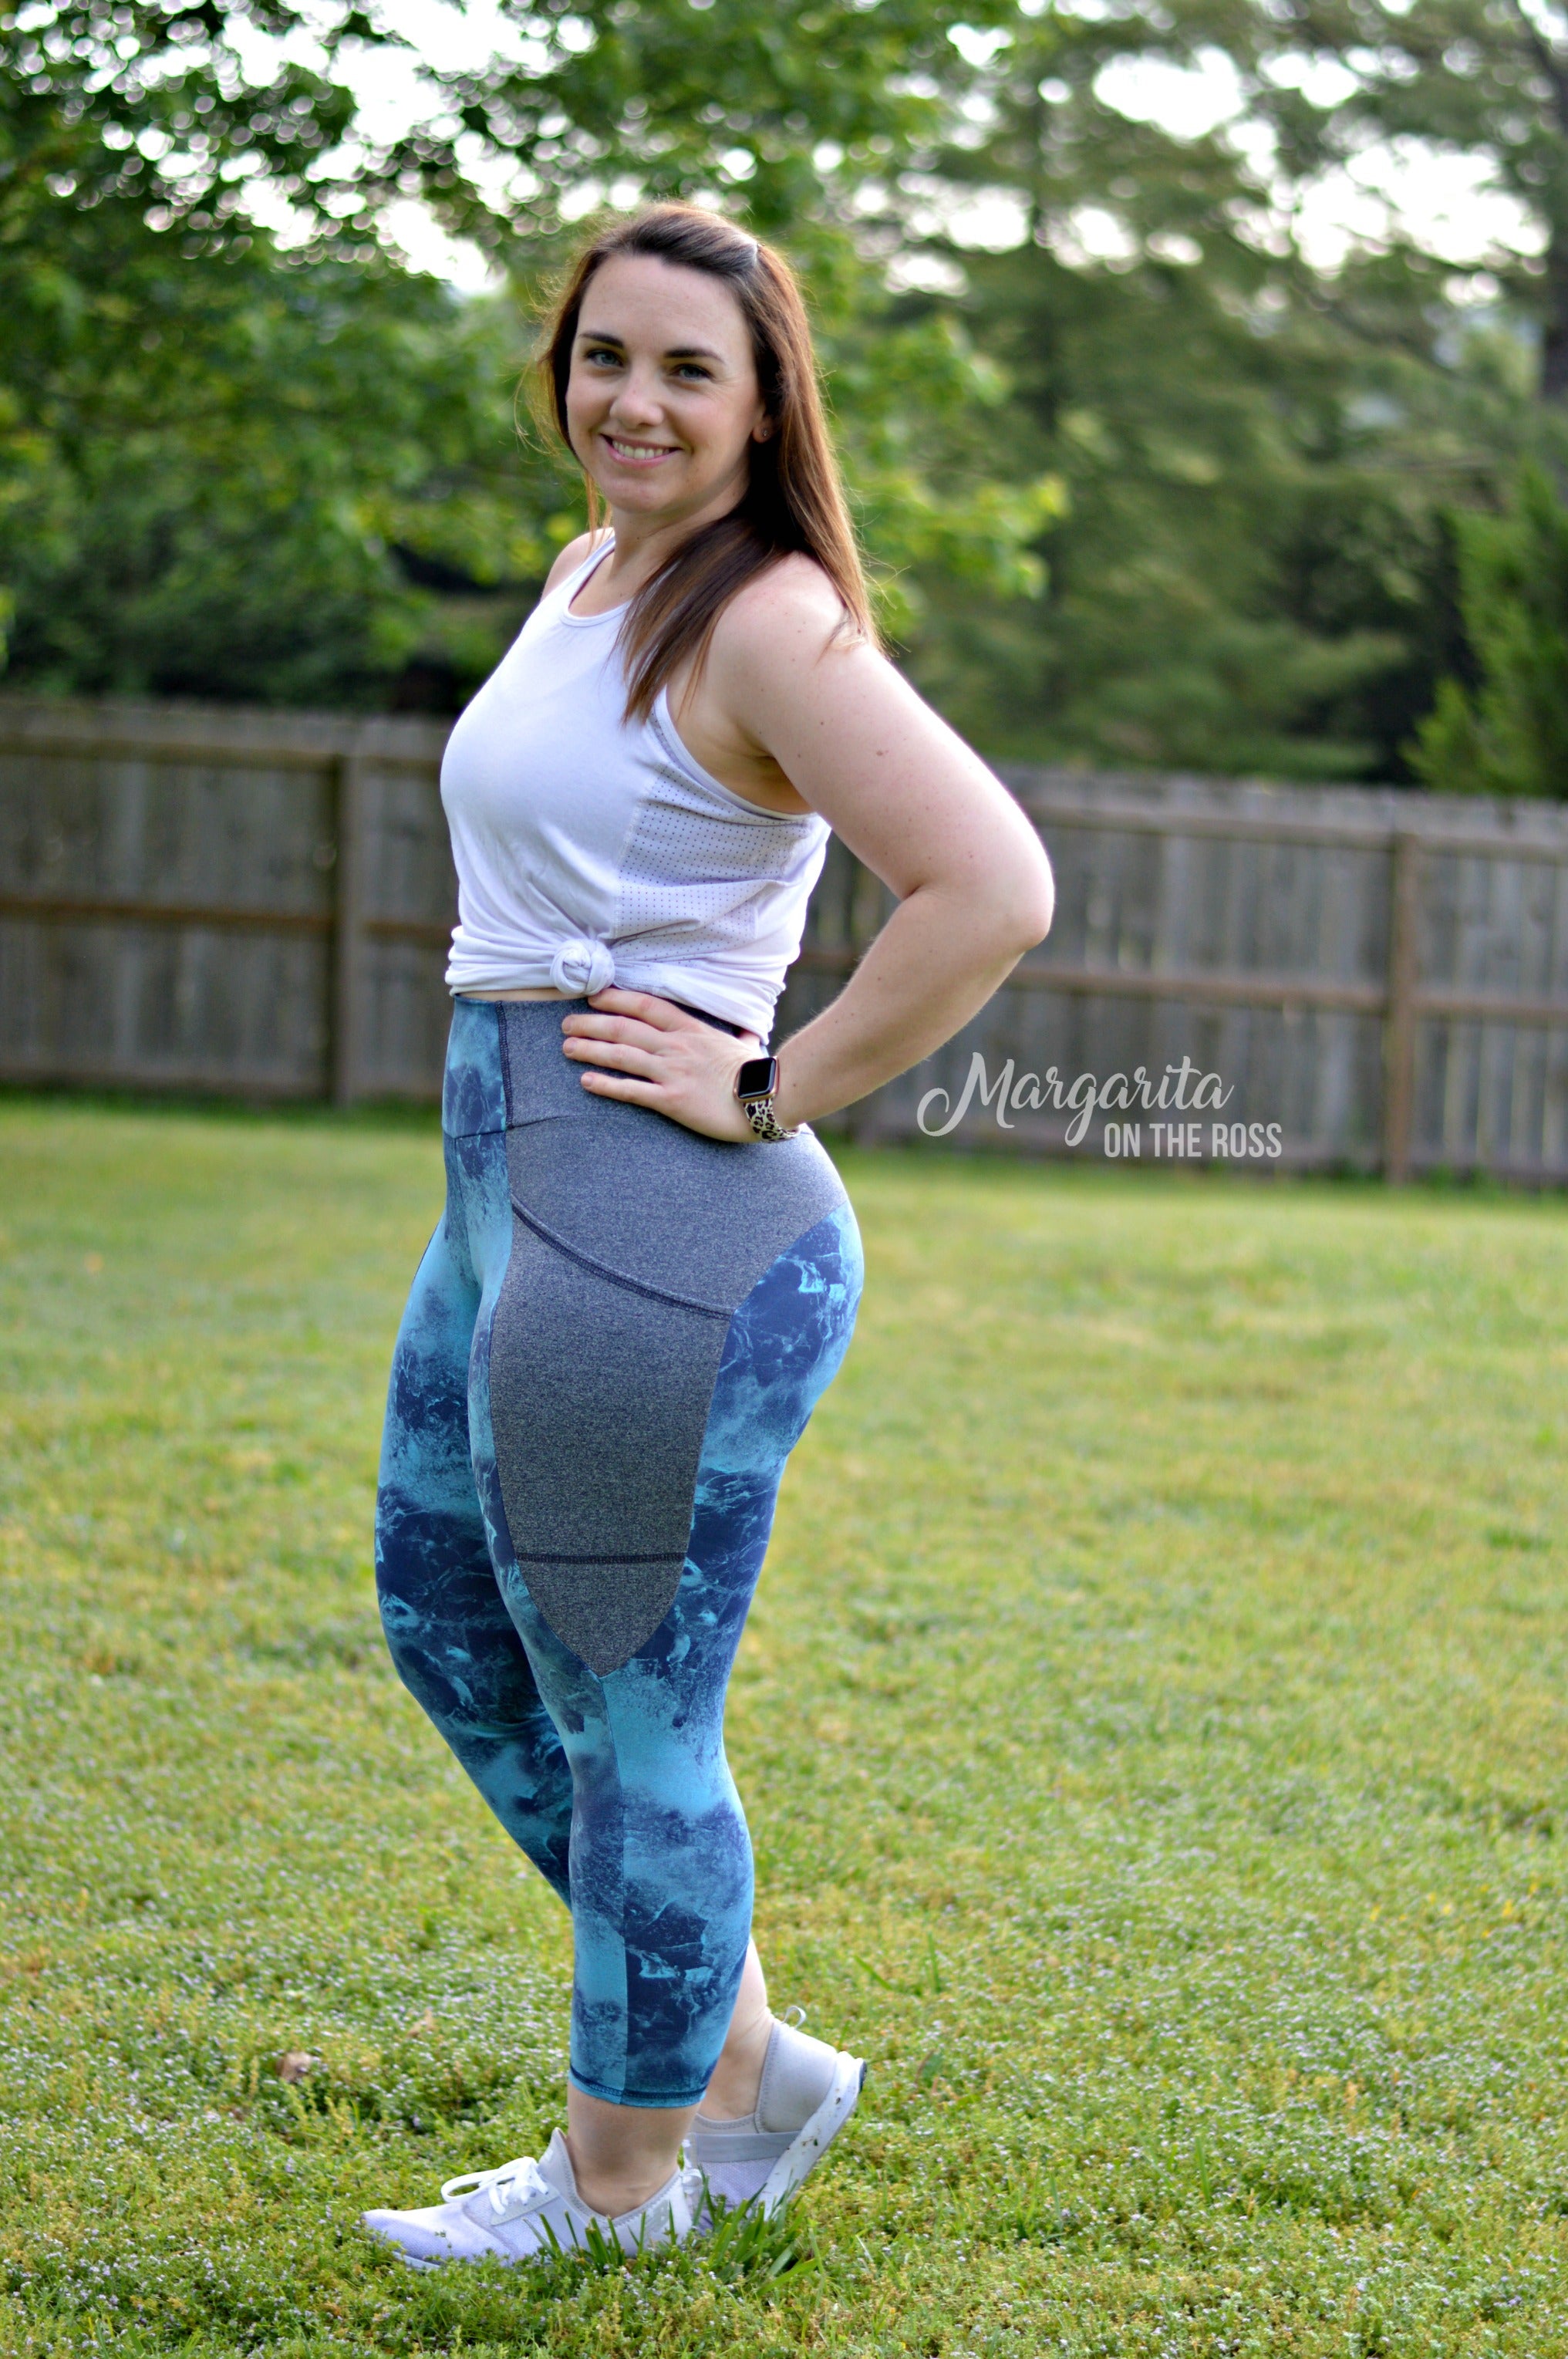 Greenstyle Leggings' Pattern Comparison - The Strides, Super Gs, Tempos,  Cavallo, and Inspires 